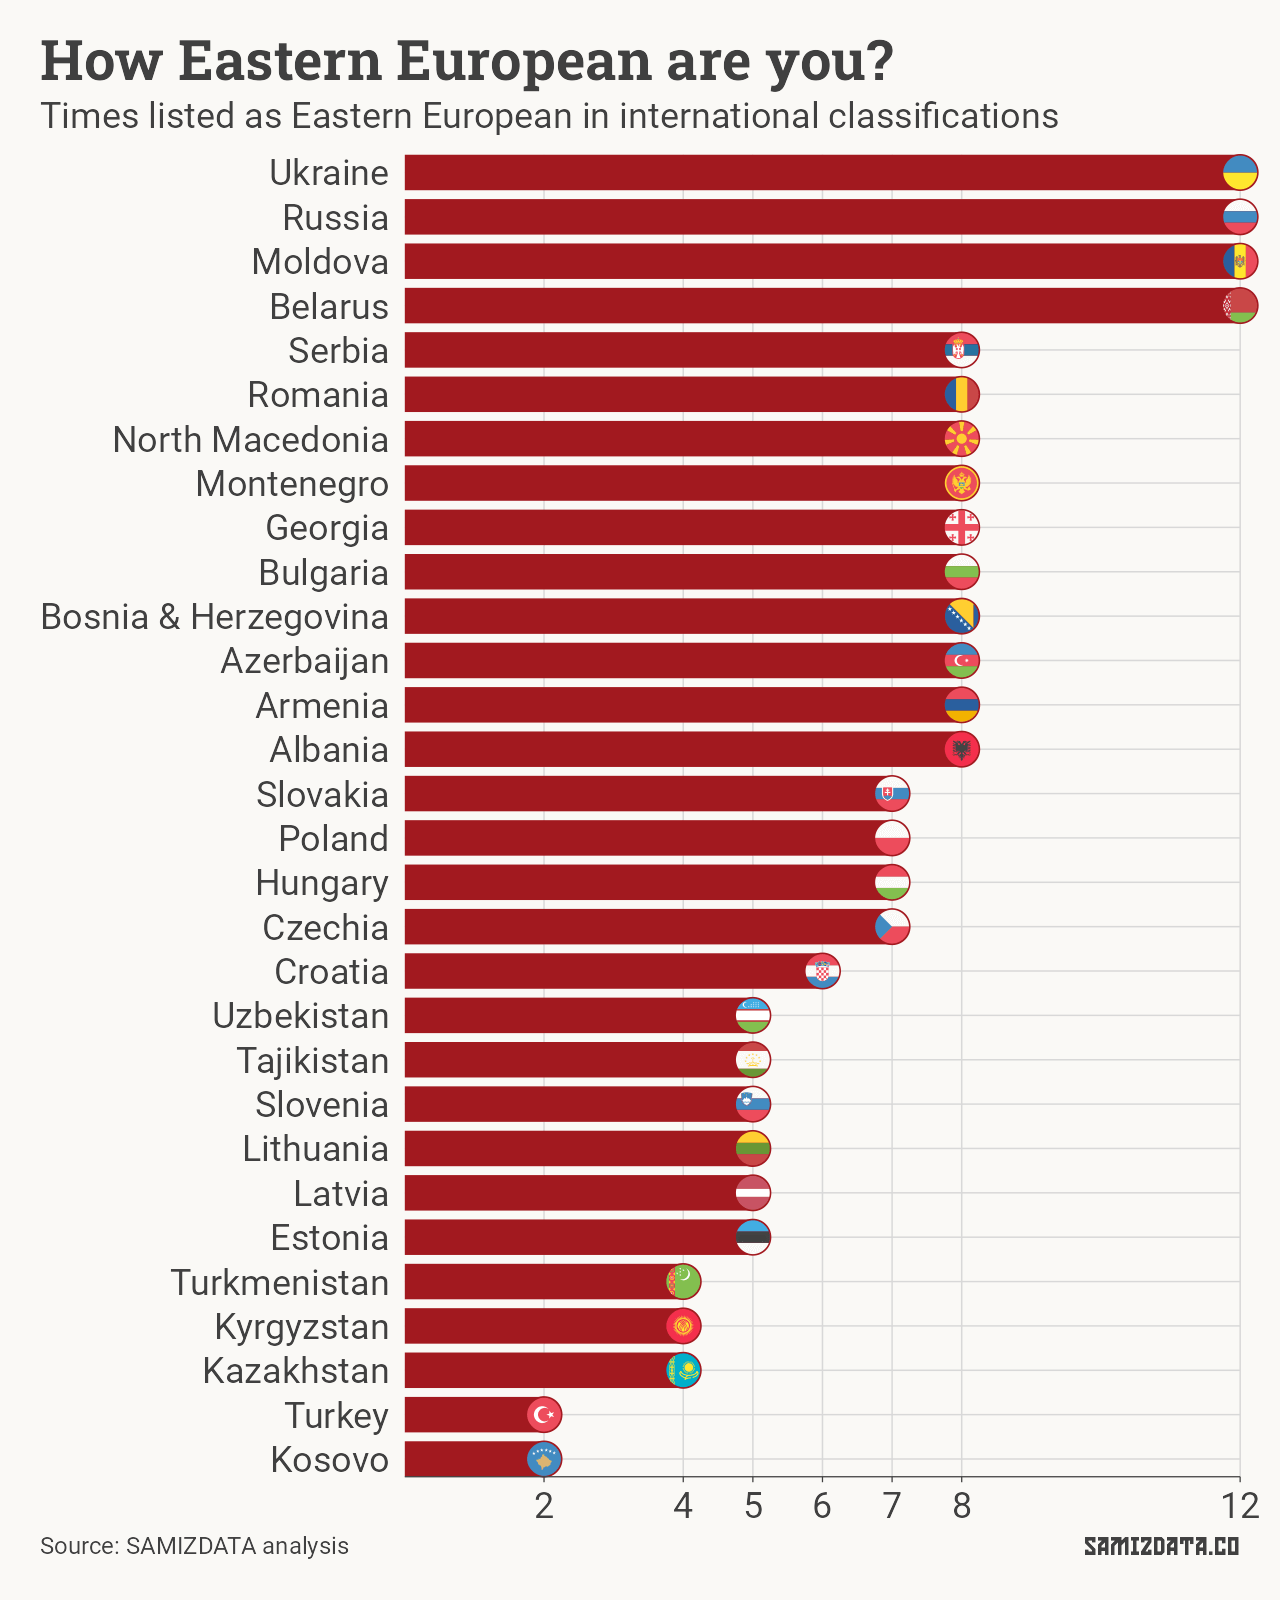 Bar chart showing Eastern European countries, ordered by how often they show up in international classifications.